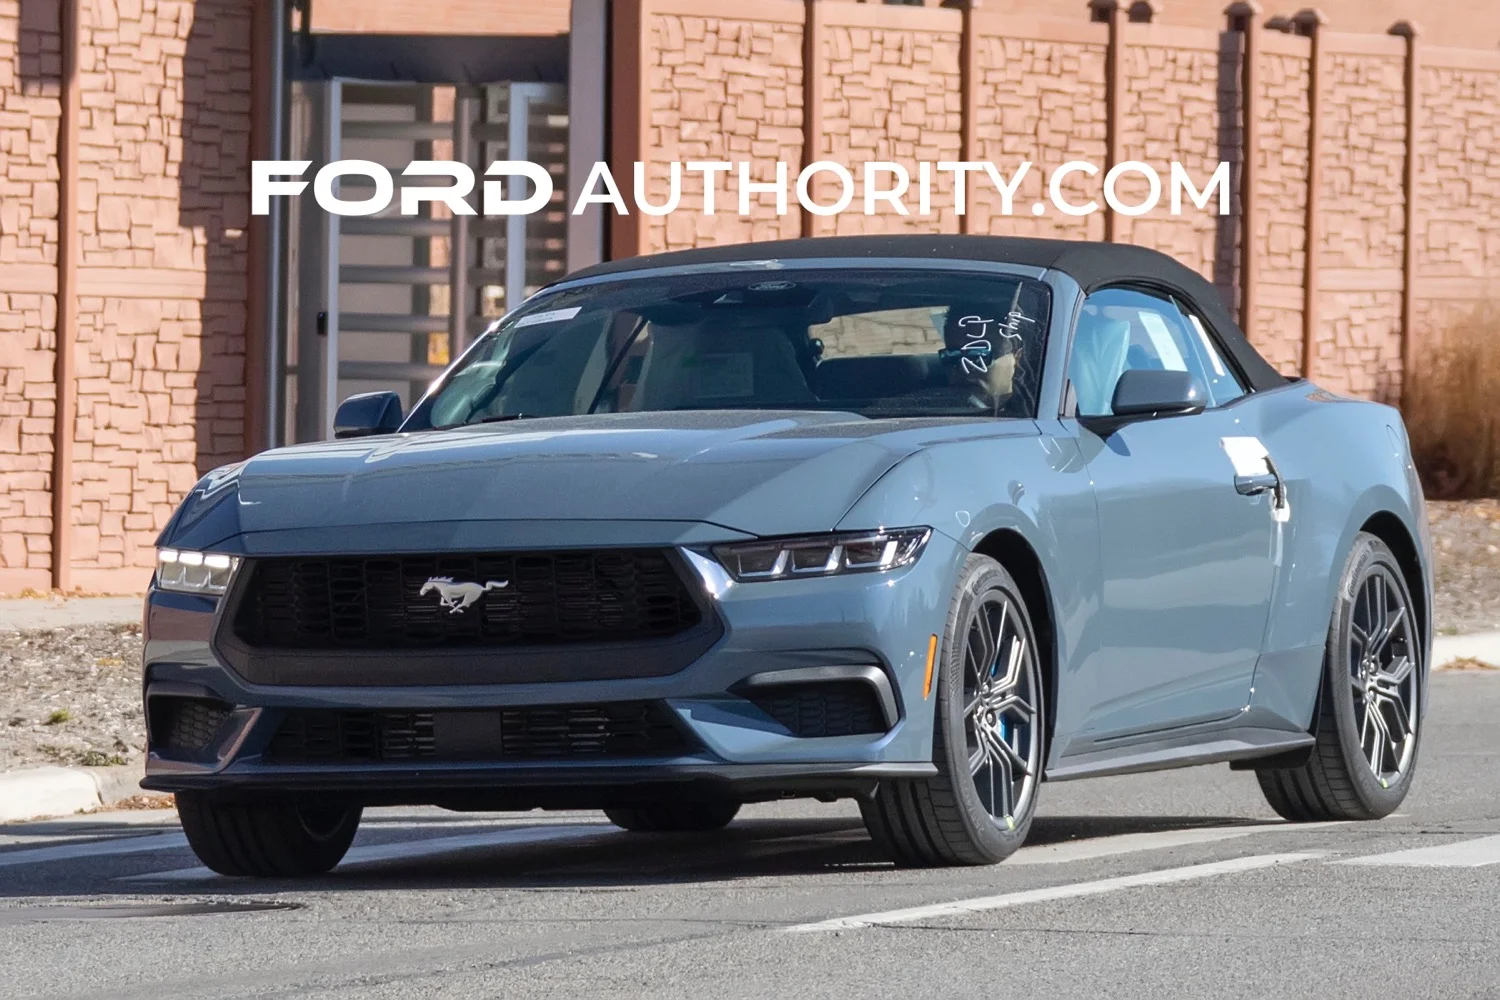 Ford Mustang EcoBoost Convertible: Real World